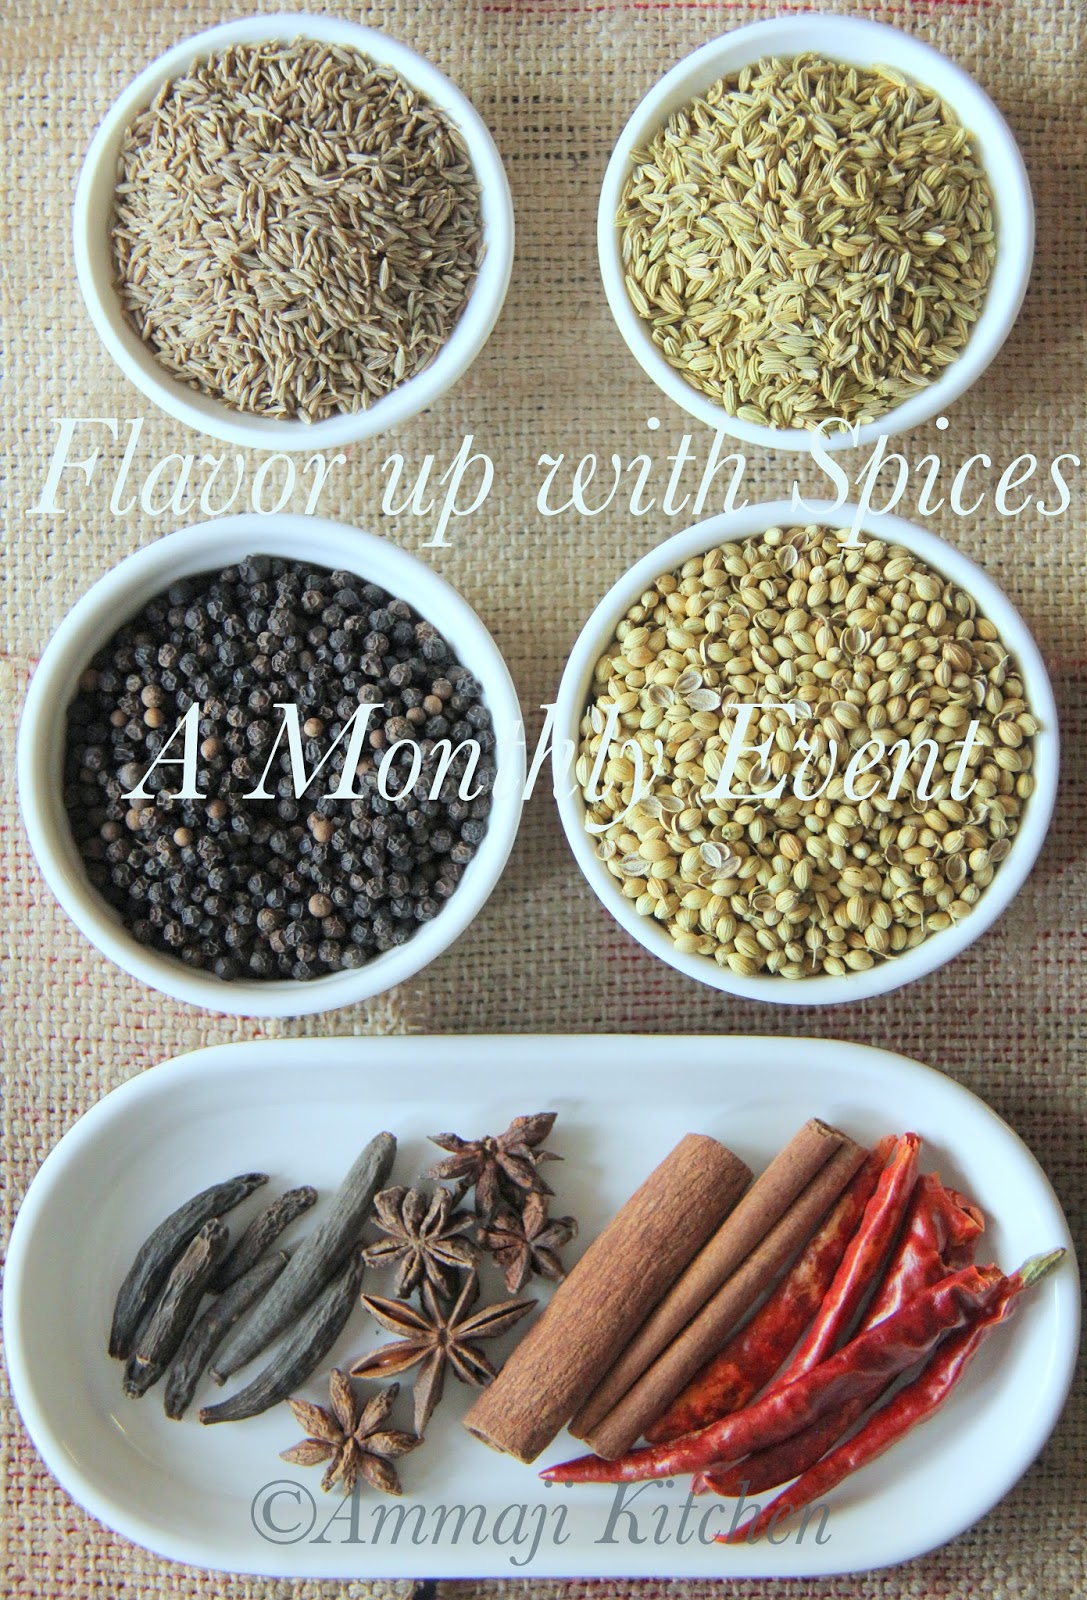 Flavor up with Spices